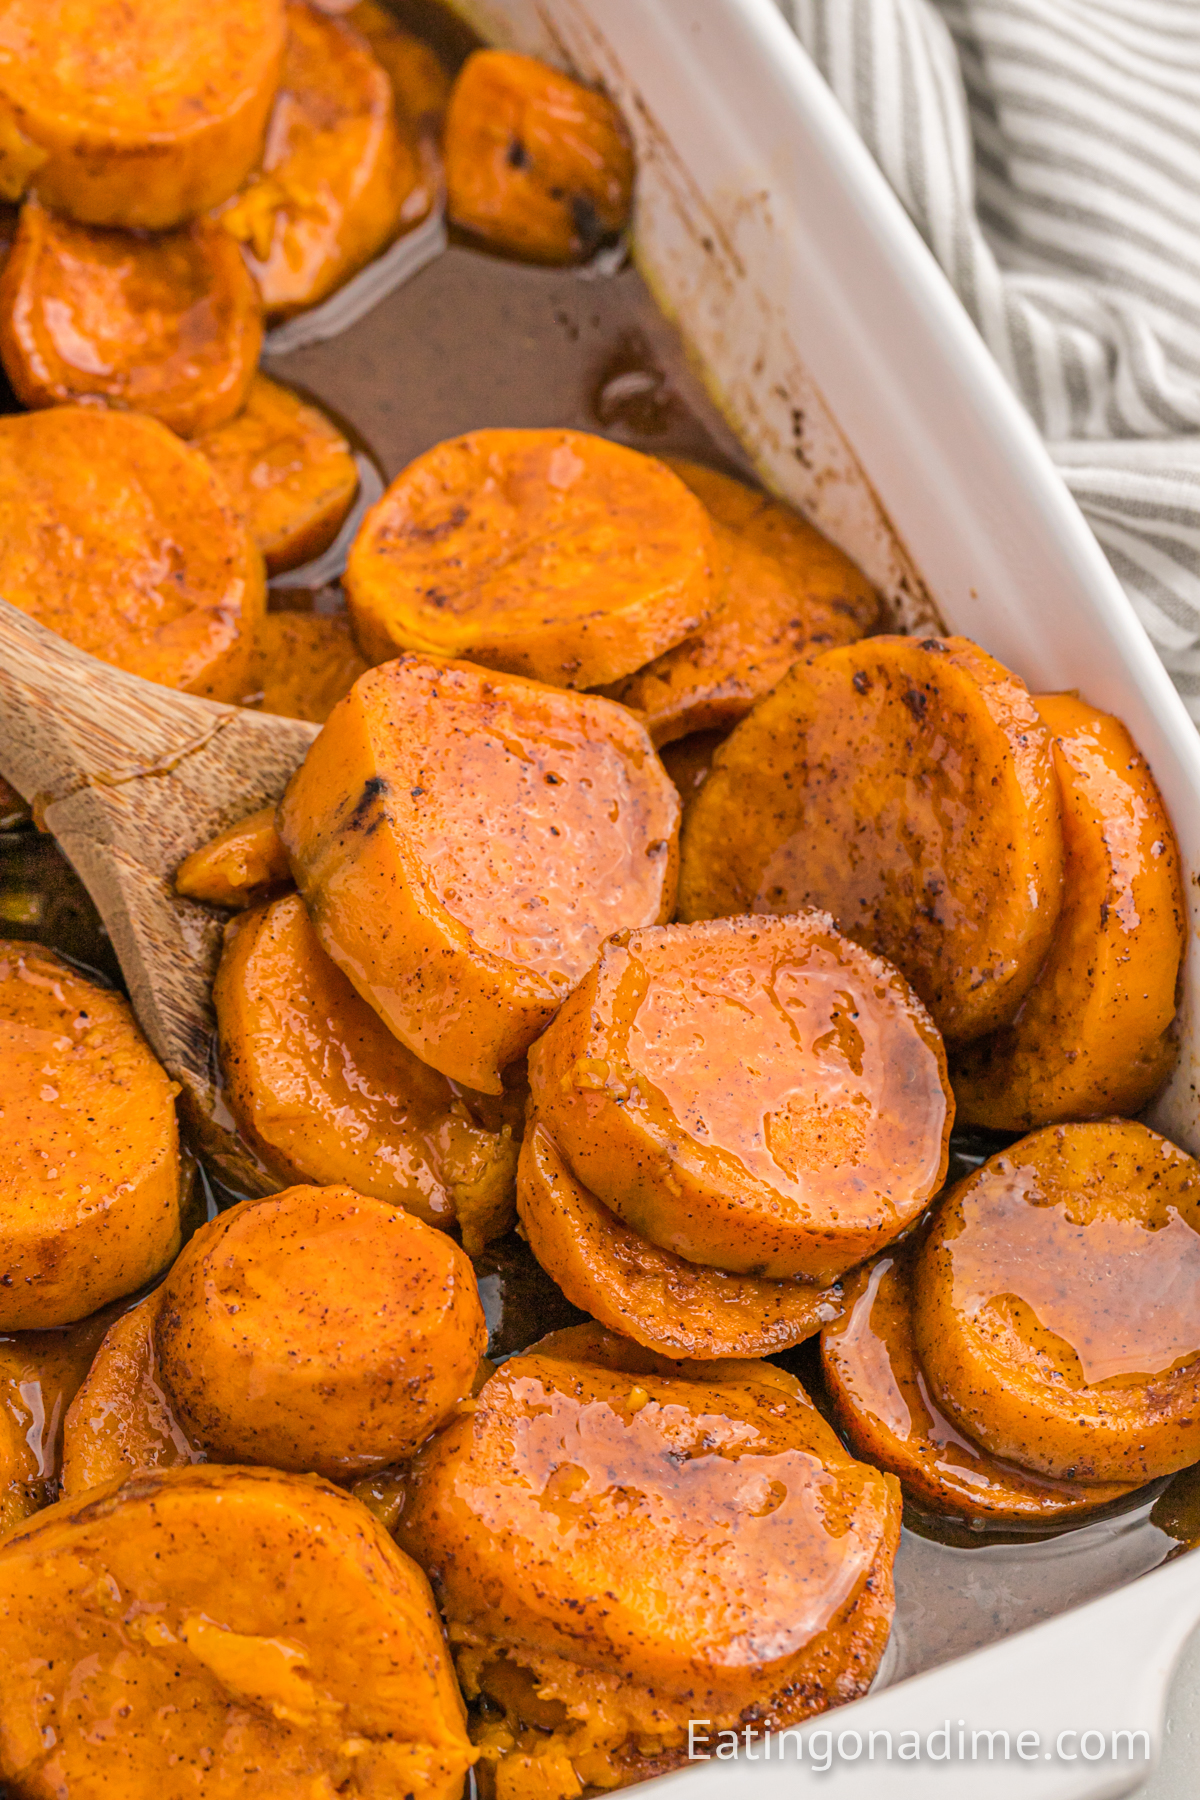 Candied sweet potatoes in a baking dish with a wooden spoon